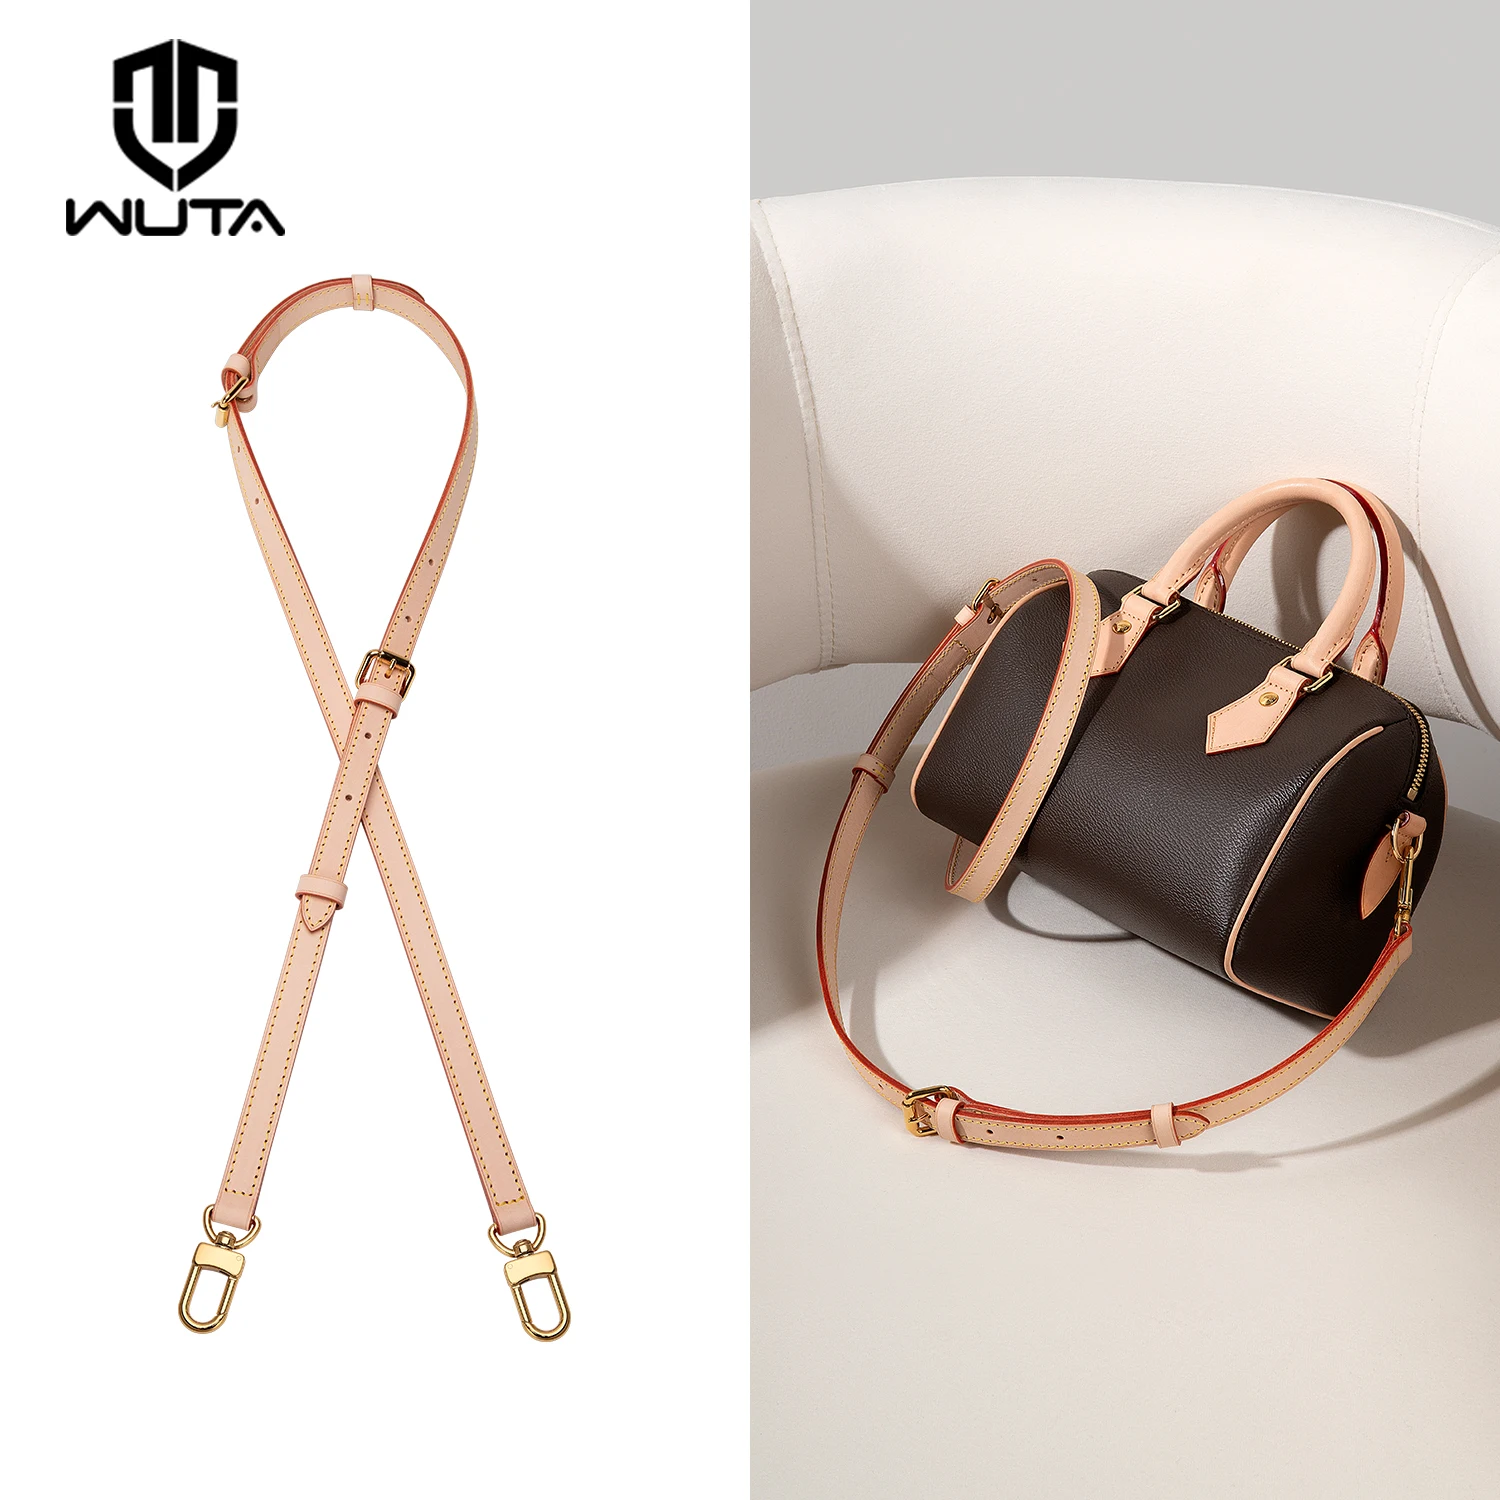 

WUTA Luxury Vegetable Tanned Leather Bag Strap For LV Speedy Adjustable Crossbody Shoulder Straps Replacement Bag Accessories